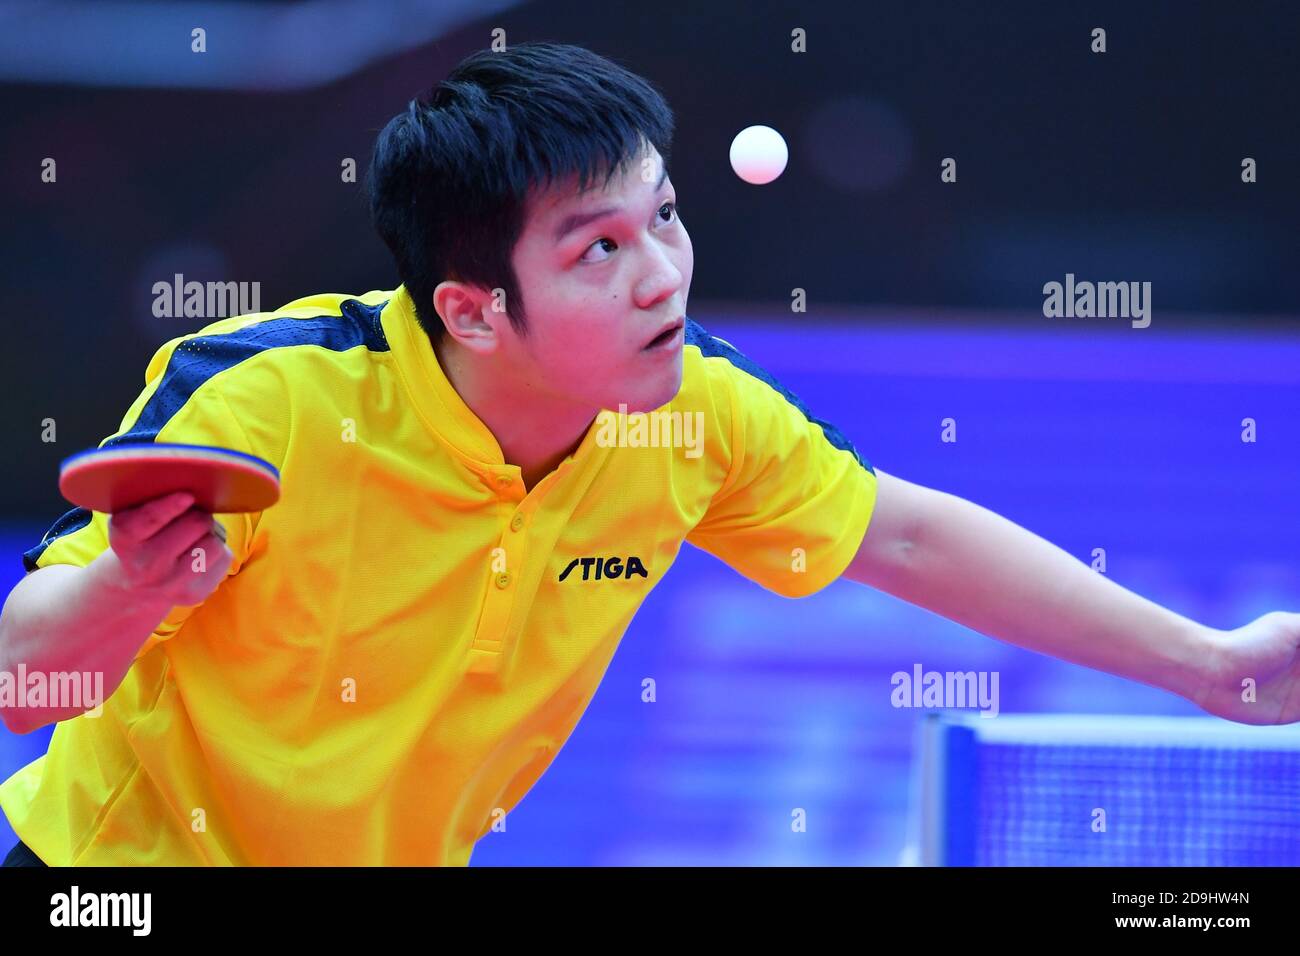 Chinese table player Fan Zhendong against Chinese table tennis player Ma Long at the final of 2020 China National Table Tennis Champio Photo - Alamy